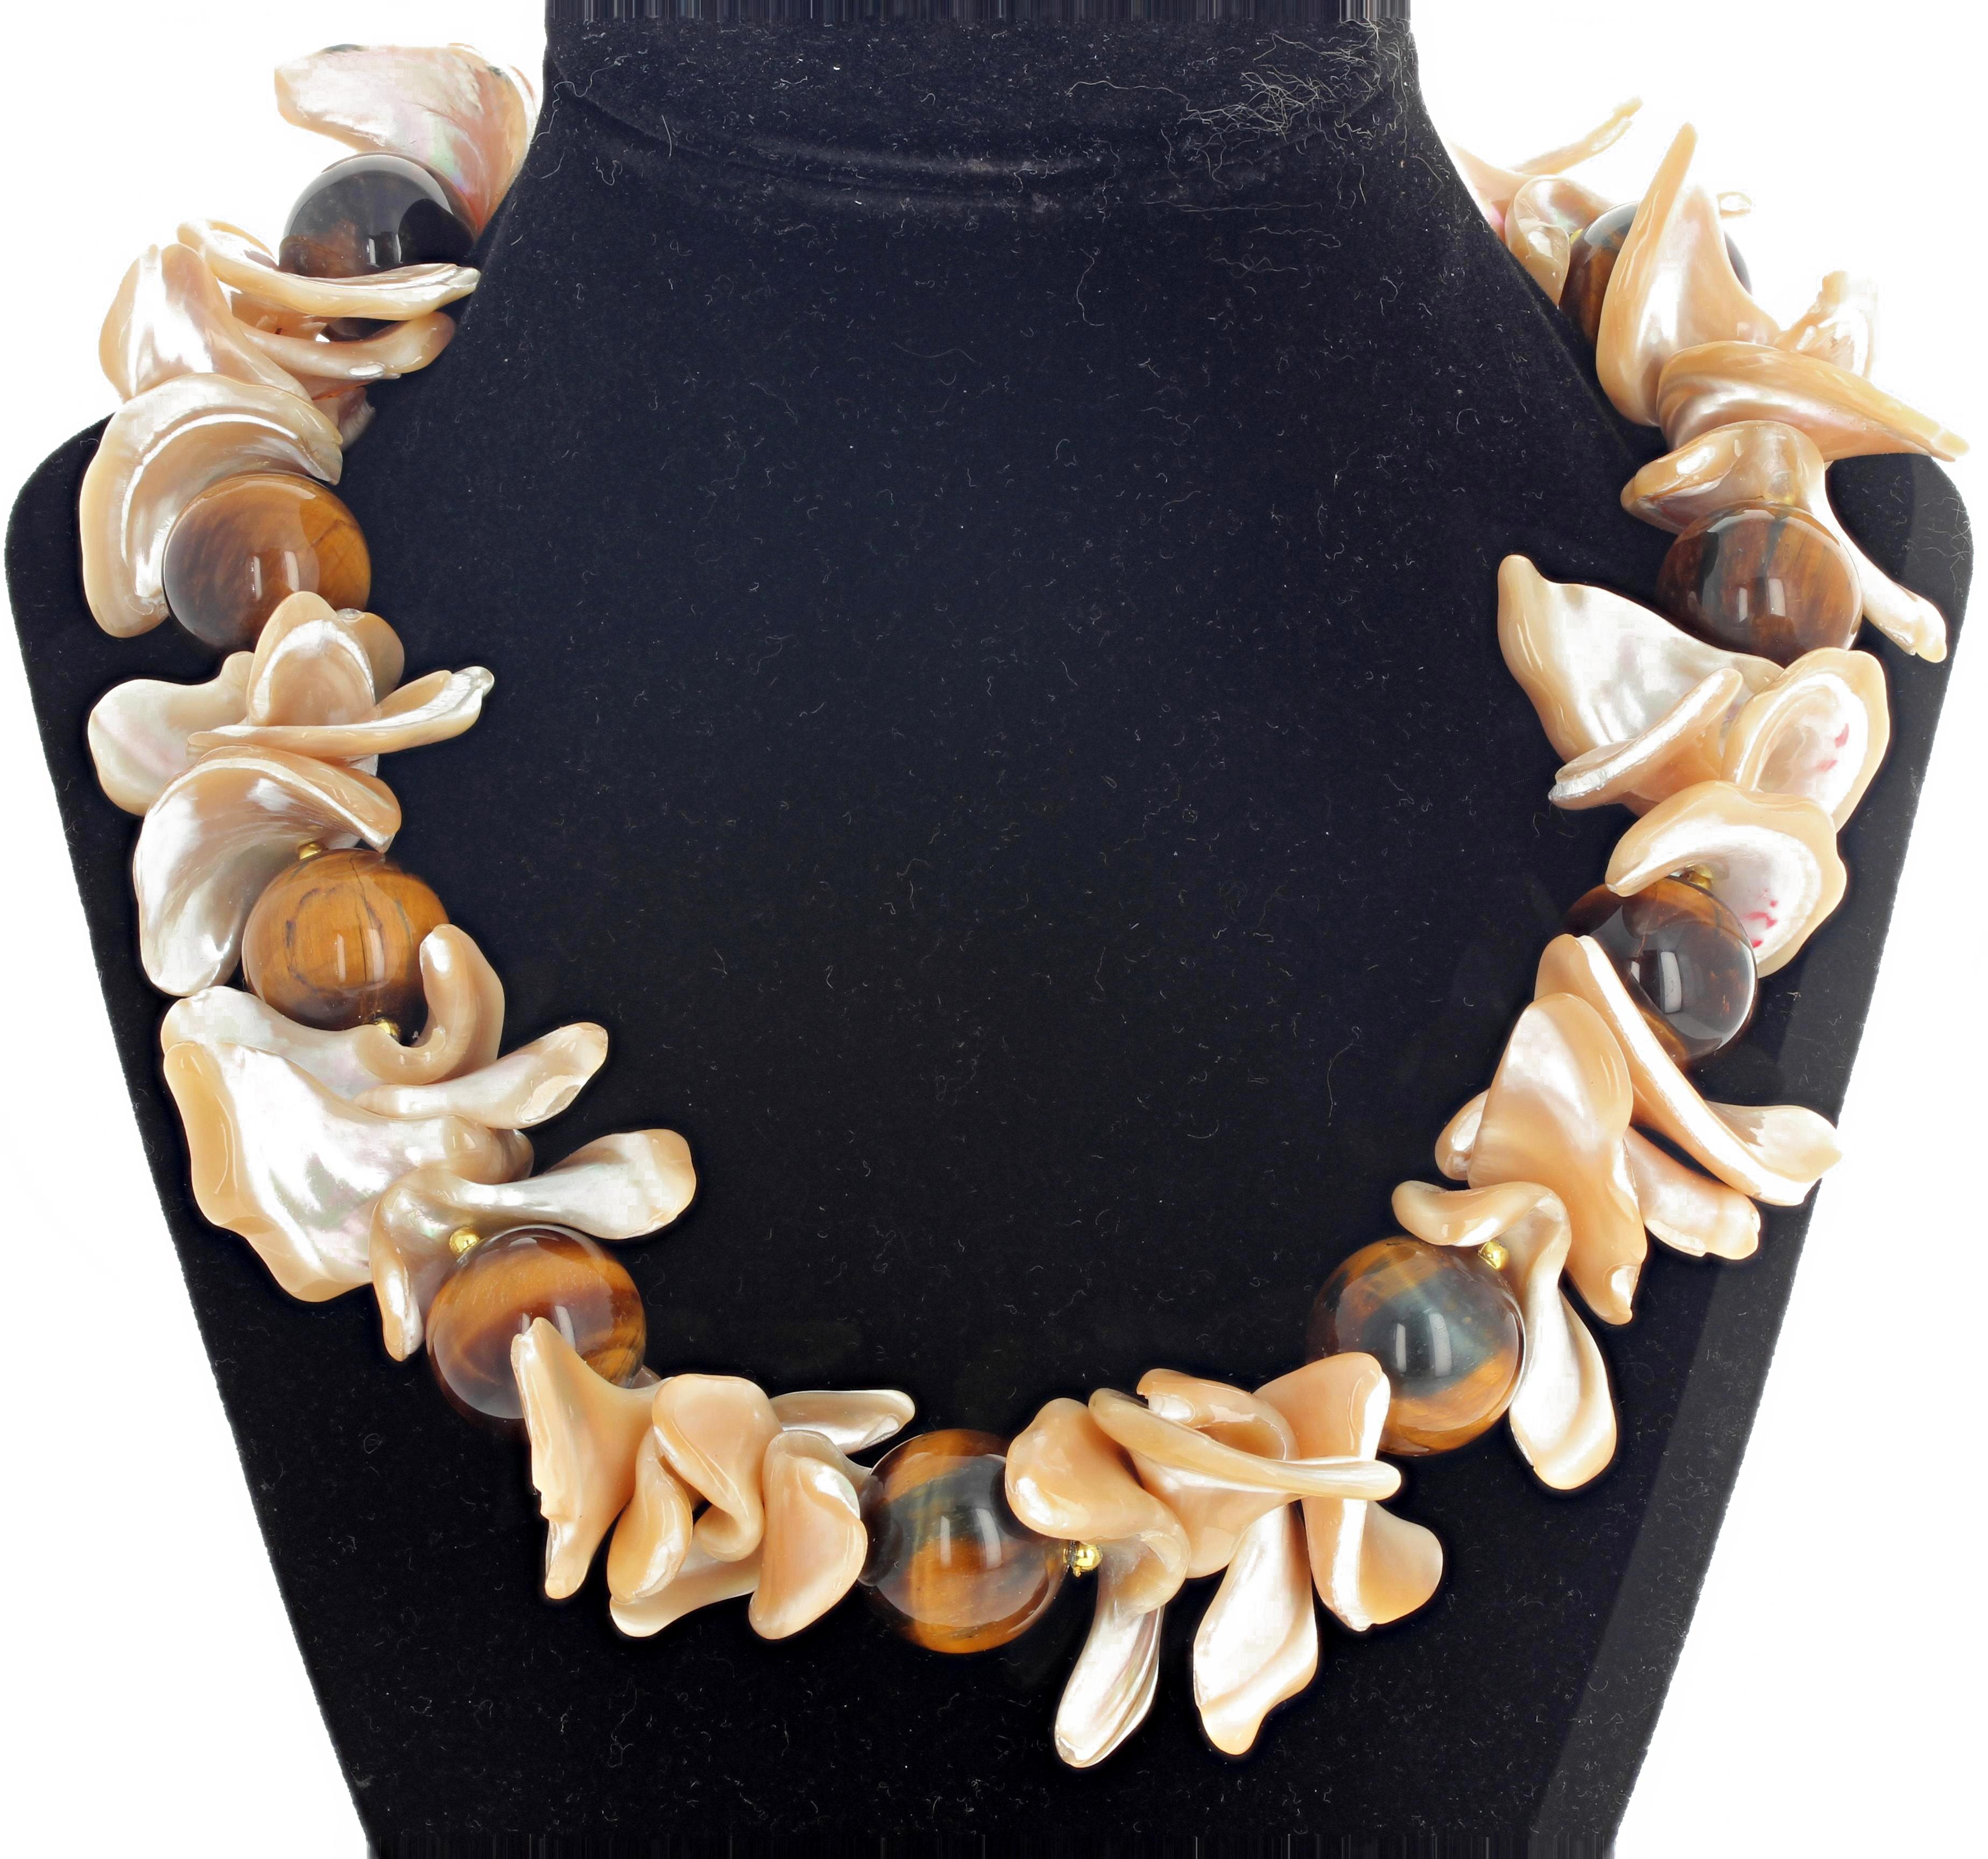 Beautiful pearl Shells swoop gracefully artistically around these glowing goldy tone polished Tiger Eye gem stones set in a 20 inch long necklace set with a gold tone hook clasp.  You can flipflop the shells in different directions for different